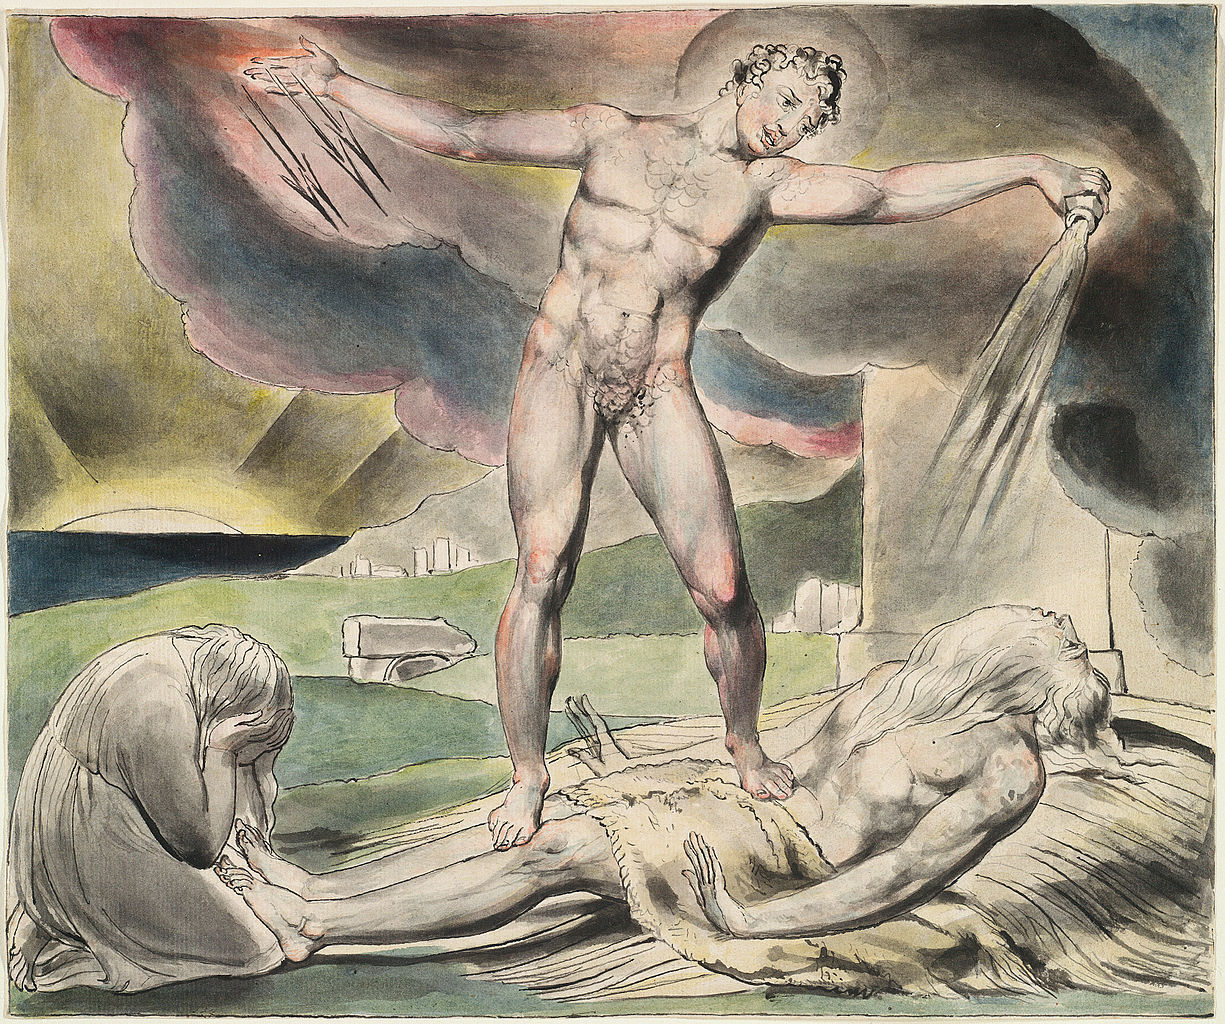 William Blake,  	 English: Illustrations to the Book of Job, The Linnell Set, object 6 (Butlin 551.6) "Satan Smiting Job with Boils"